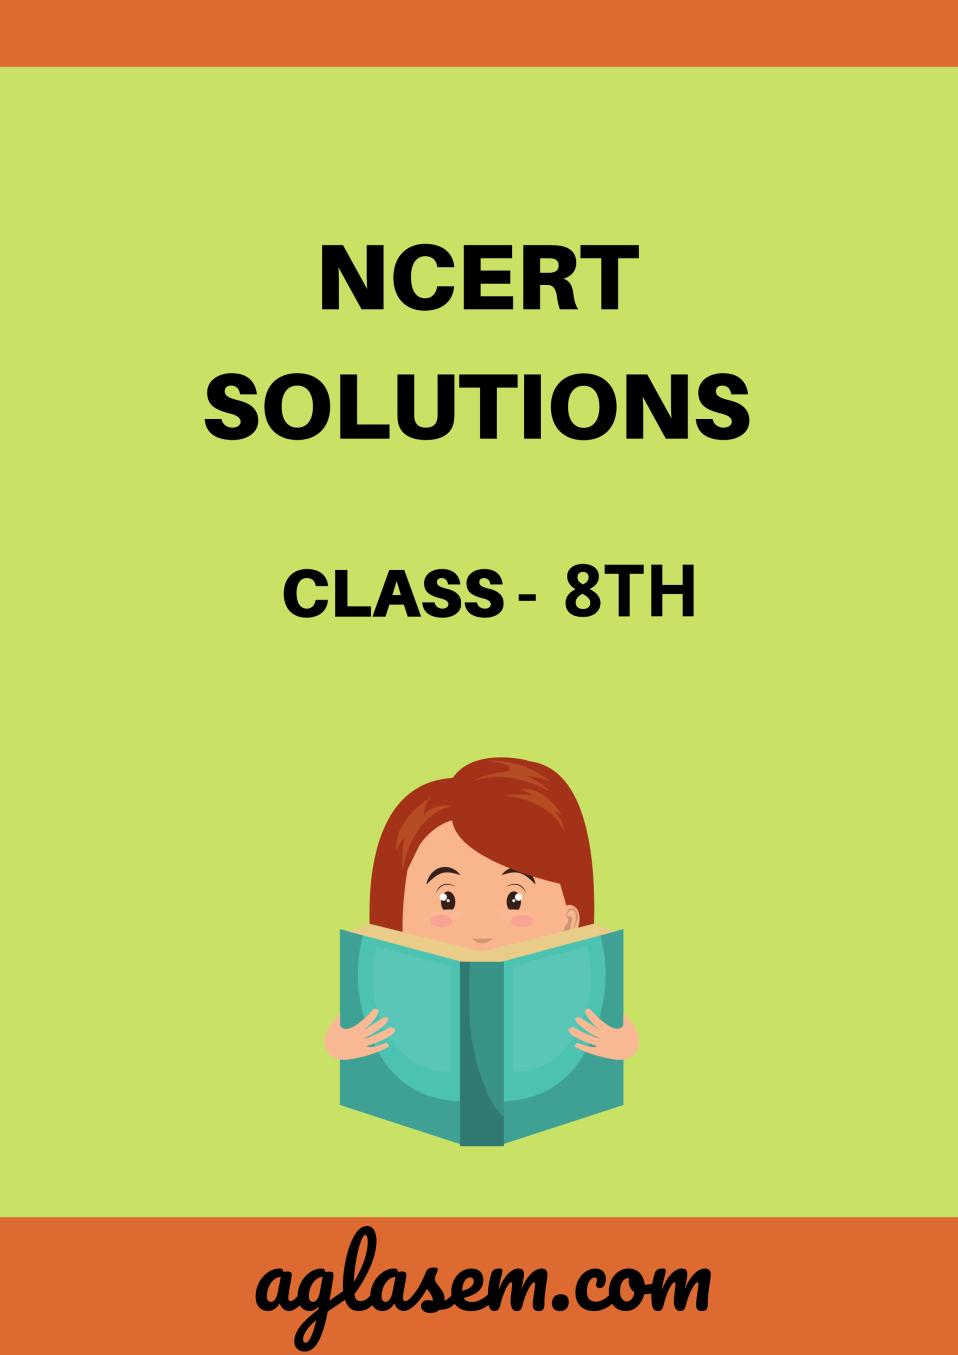 NCERT Solutions for Class 8 Science (विज्ञान) Chapter 2 सूक्ष्मजीव मित्र एवं शत्रु - Page 1